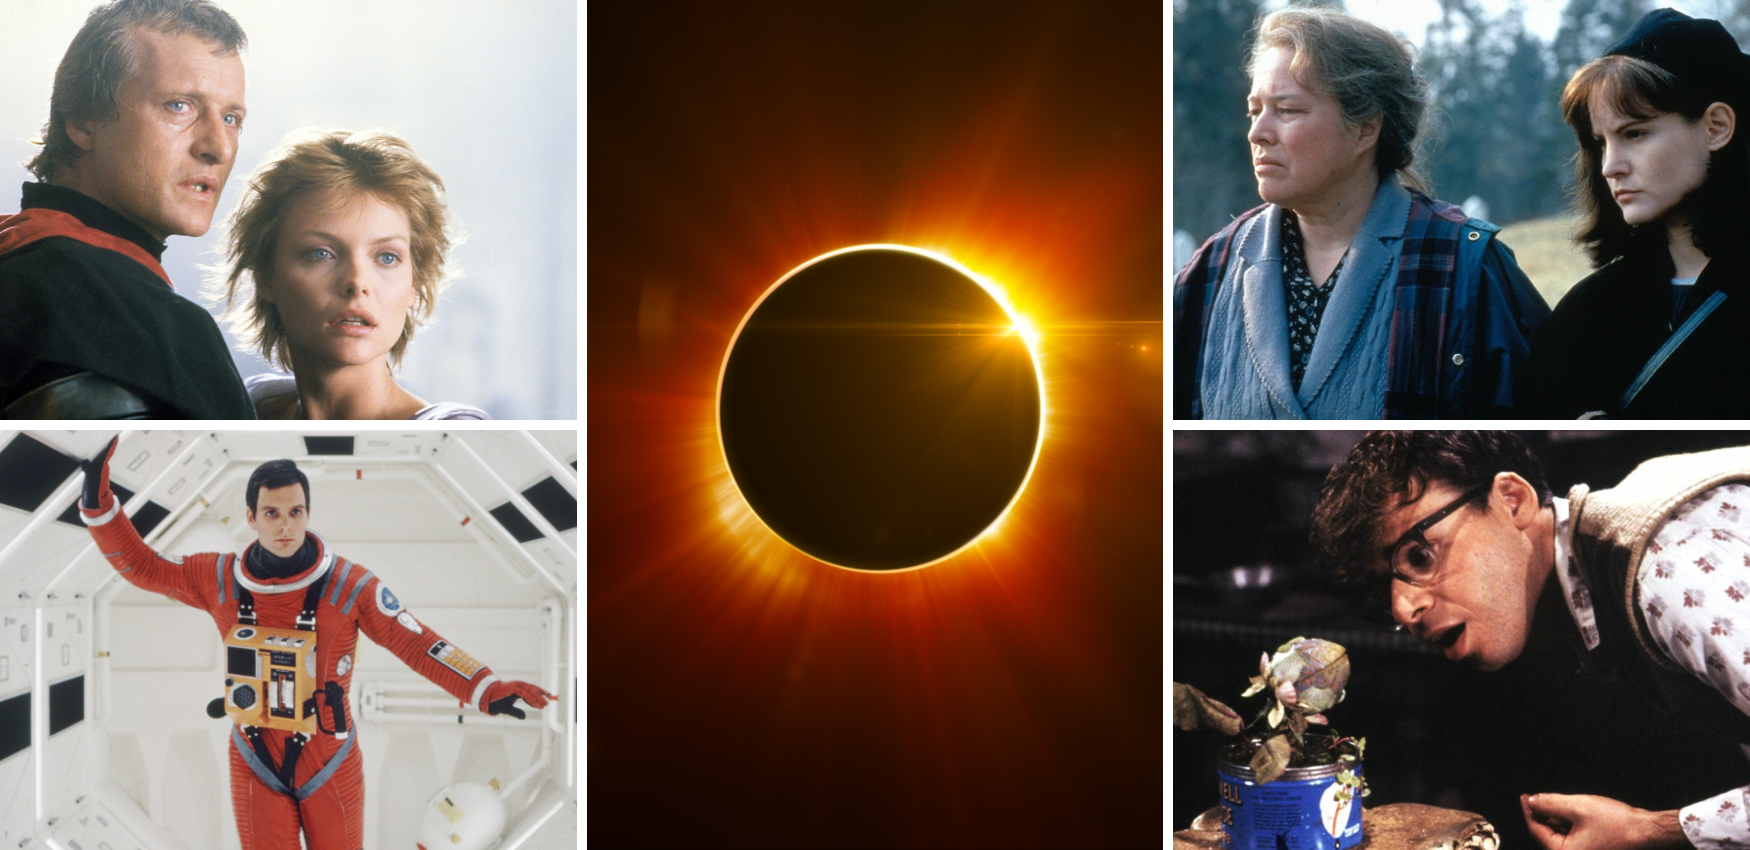 Let’s Eclipse and Chill: 12 Movies for Solar Eclipse Day!